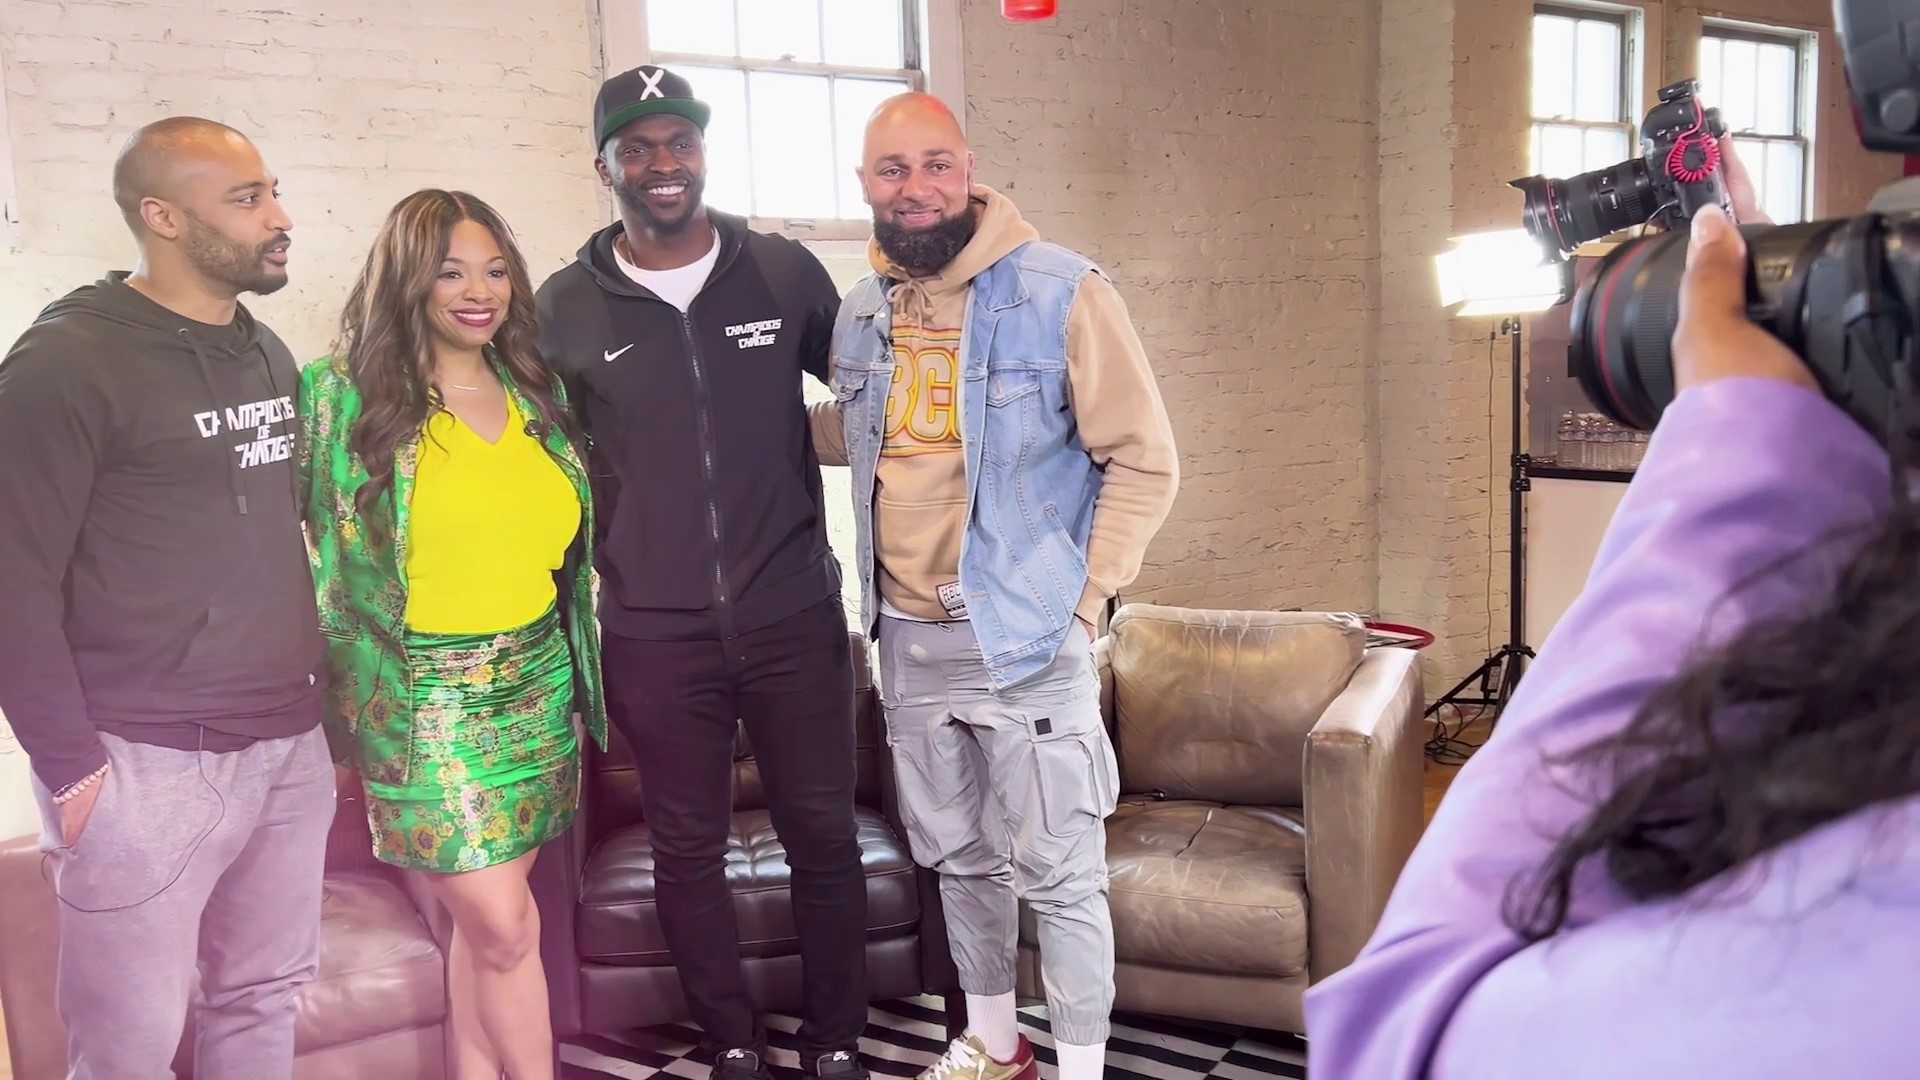 Former Seahawks Doug Baldwin and Cliff Avril, and Champions of Change executive director Bookie Gates talk with KD Hall about the work they do in the community.